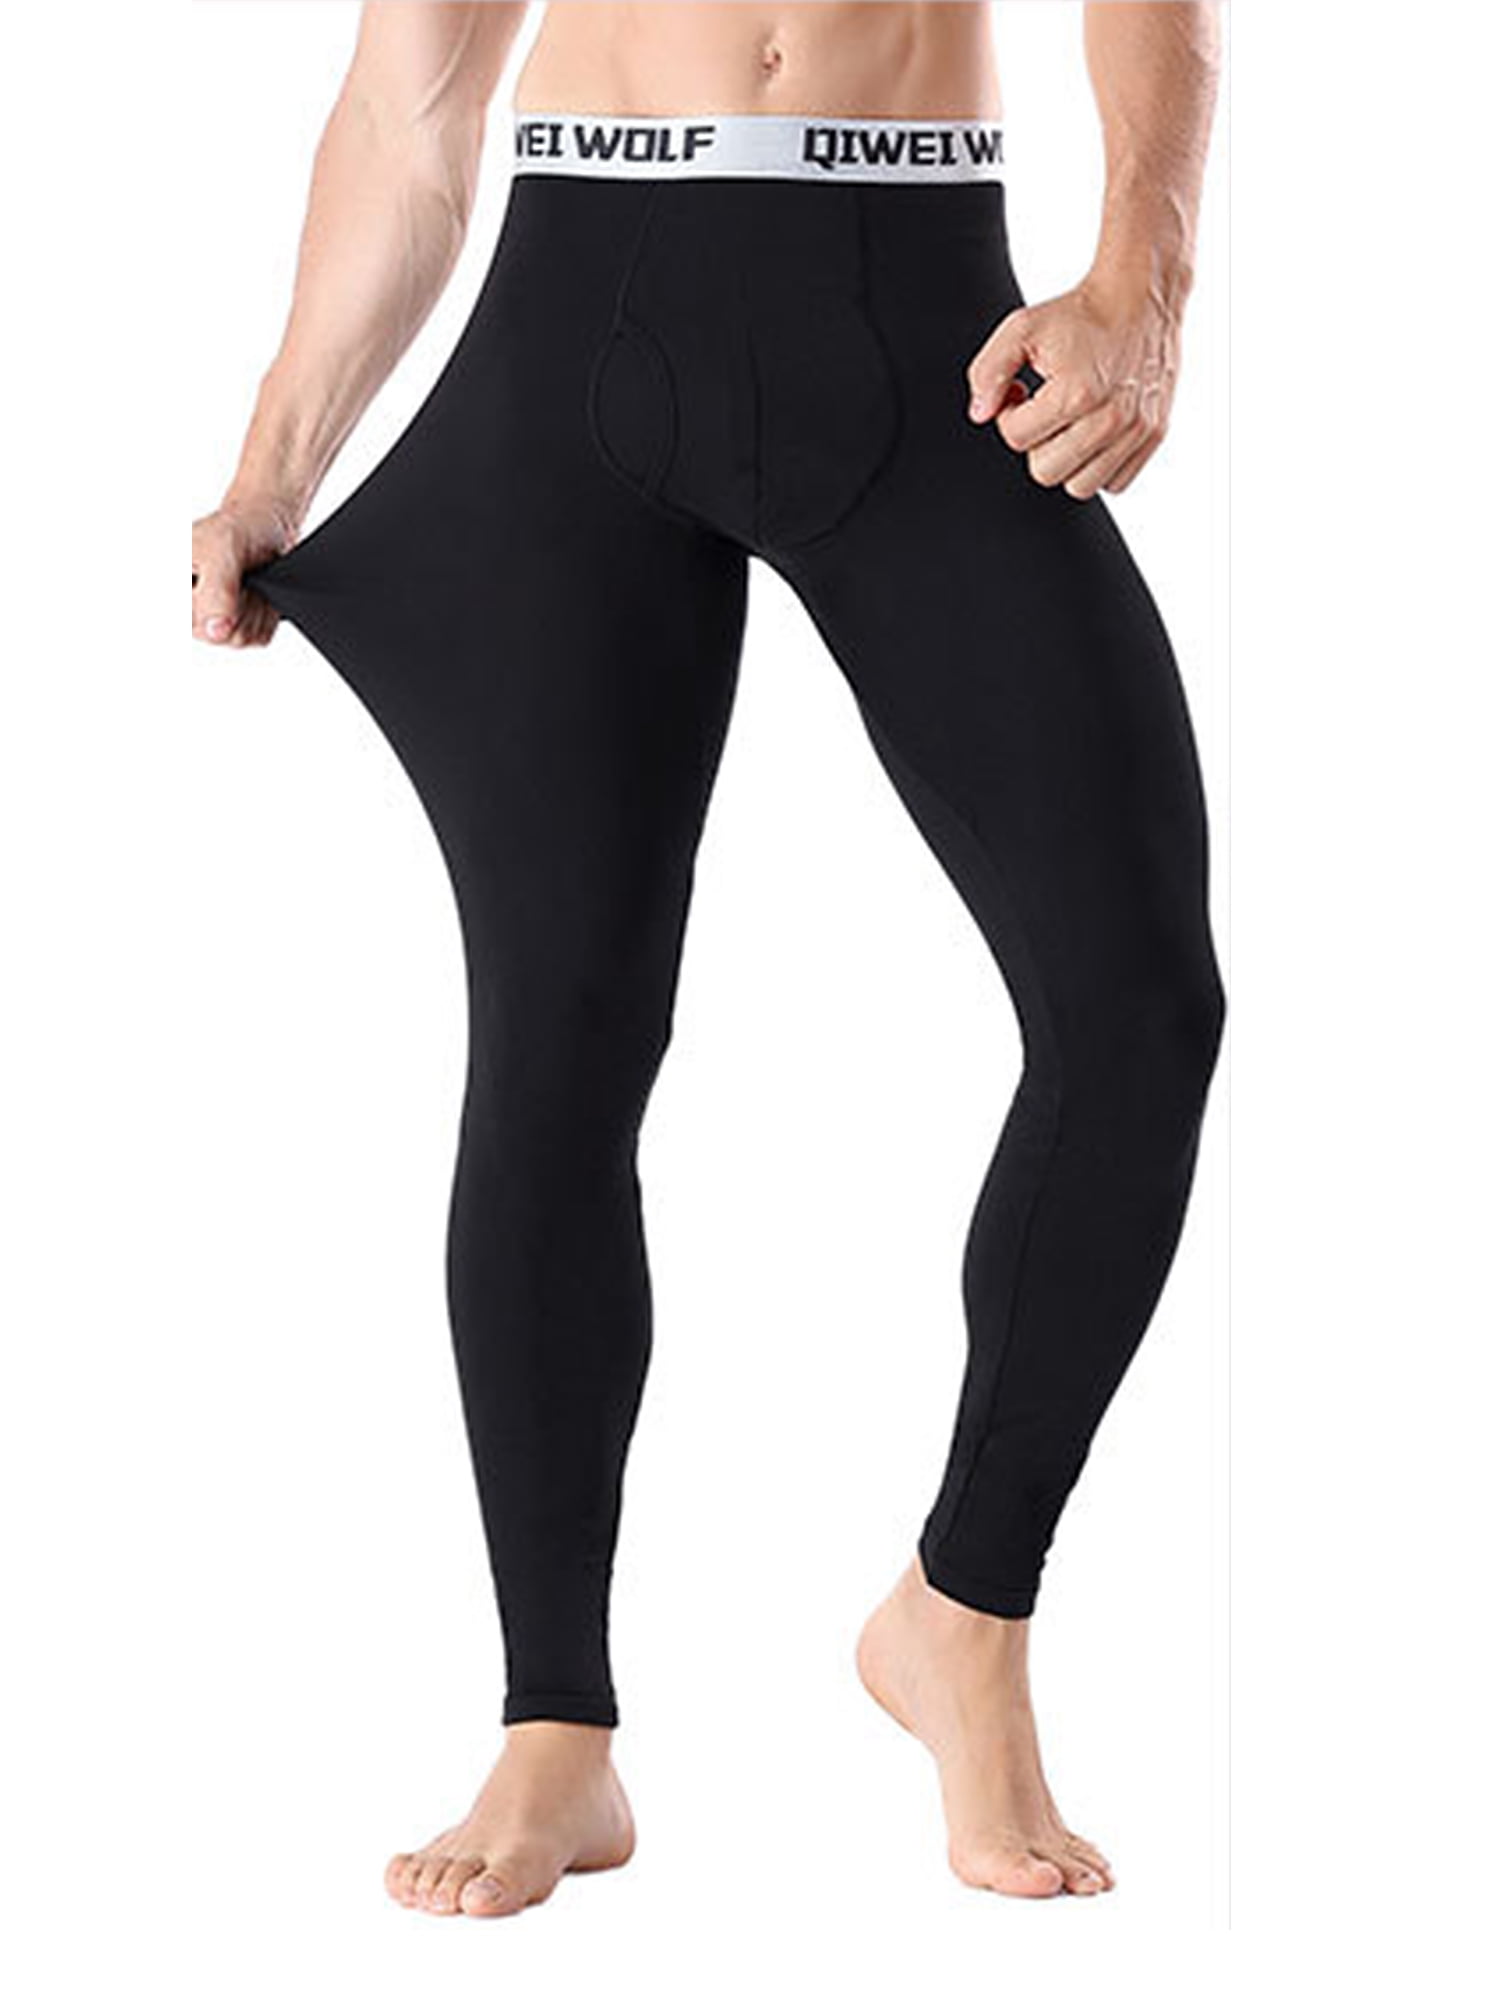 Warm Thermal Underwear Tight Fitting New MissionActive BaseLayer Tights 